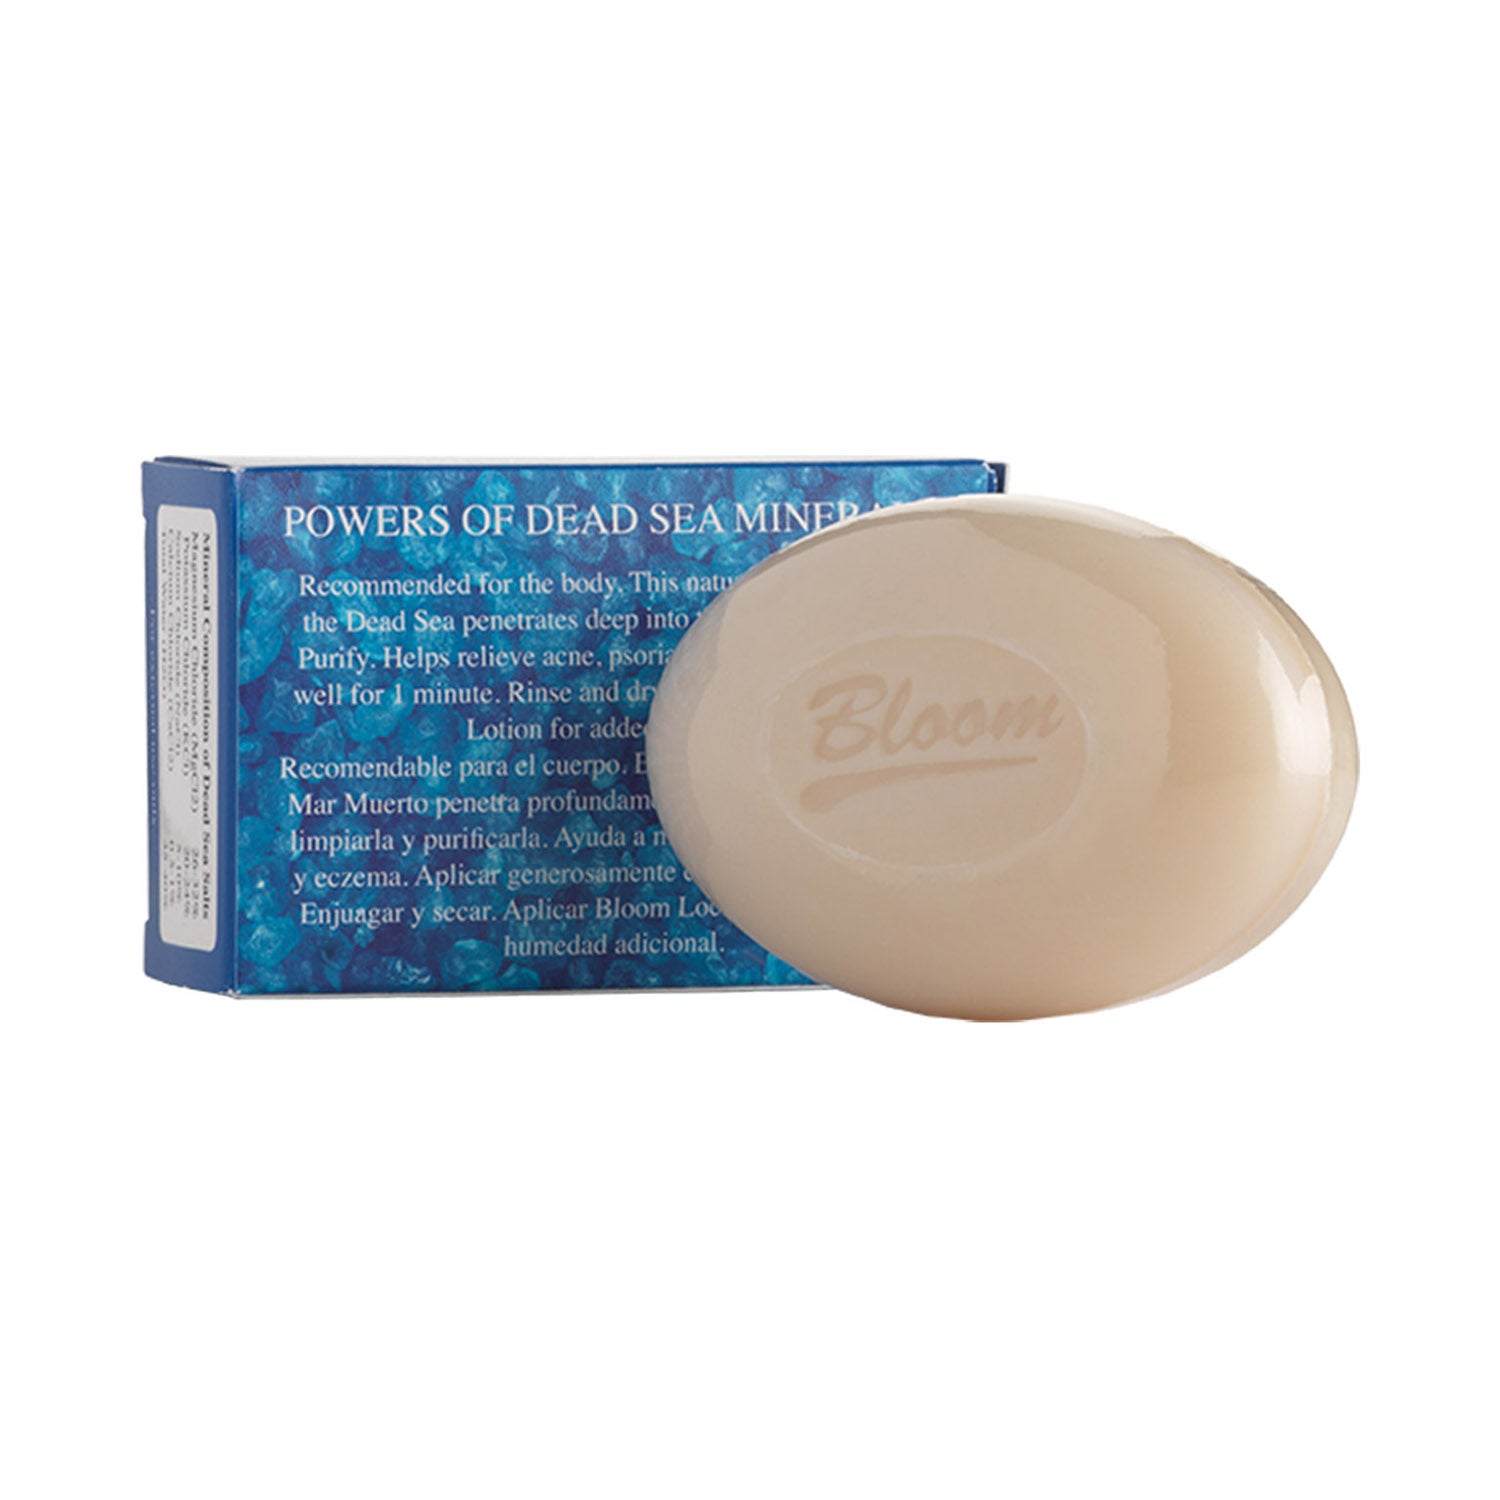 Dead Sea Products Mineral Soap Bloom